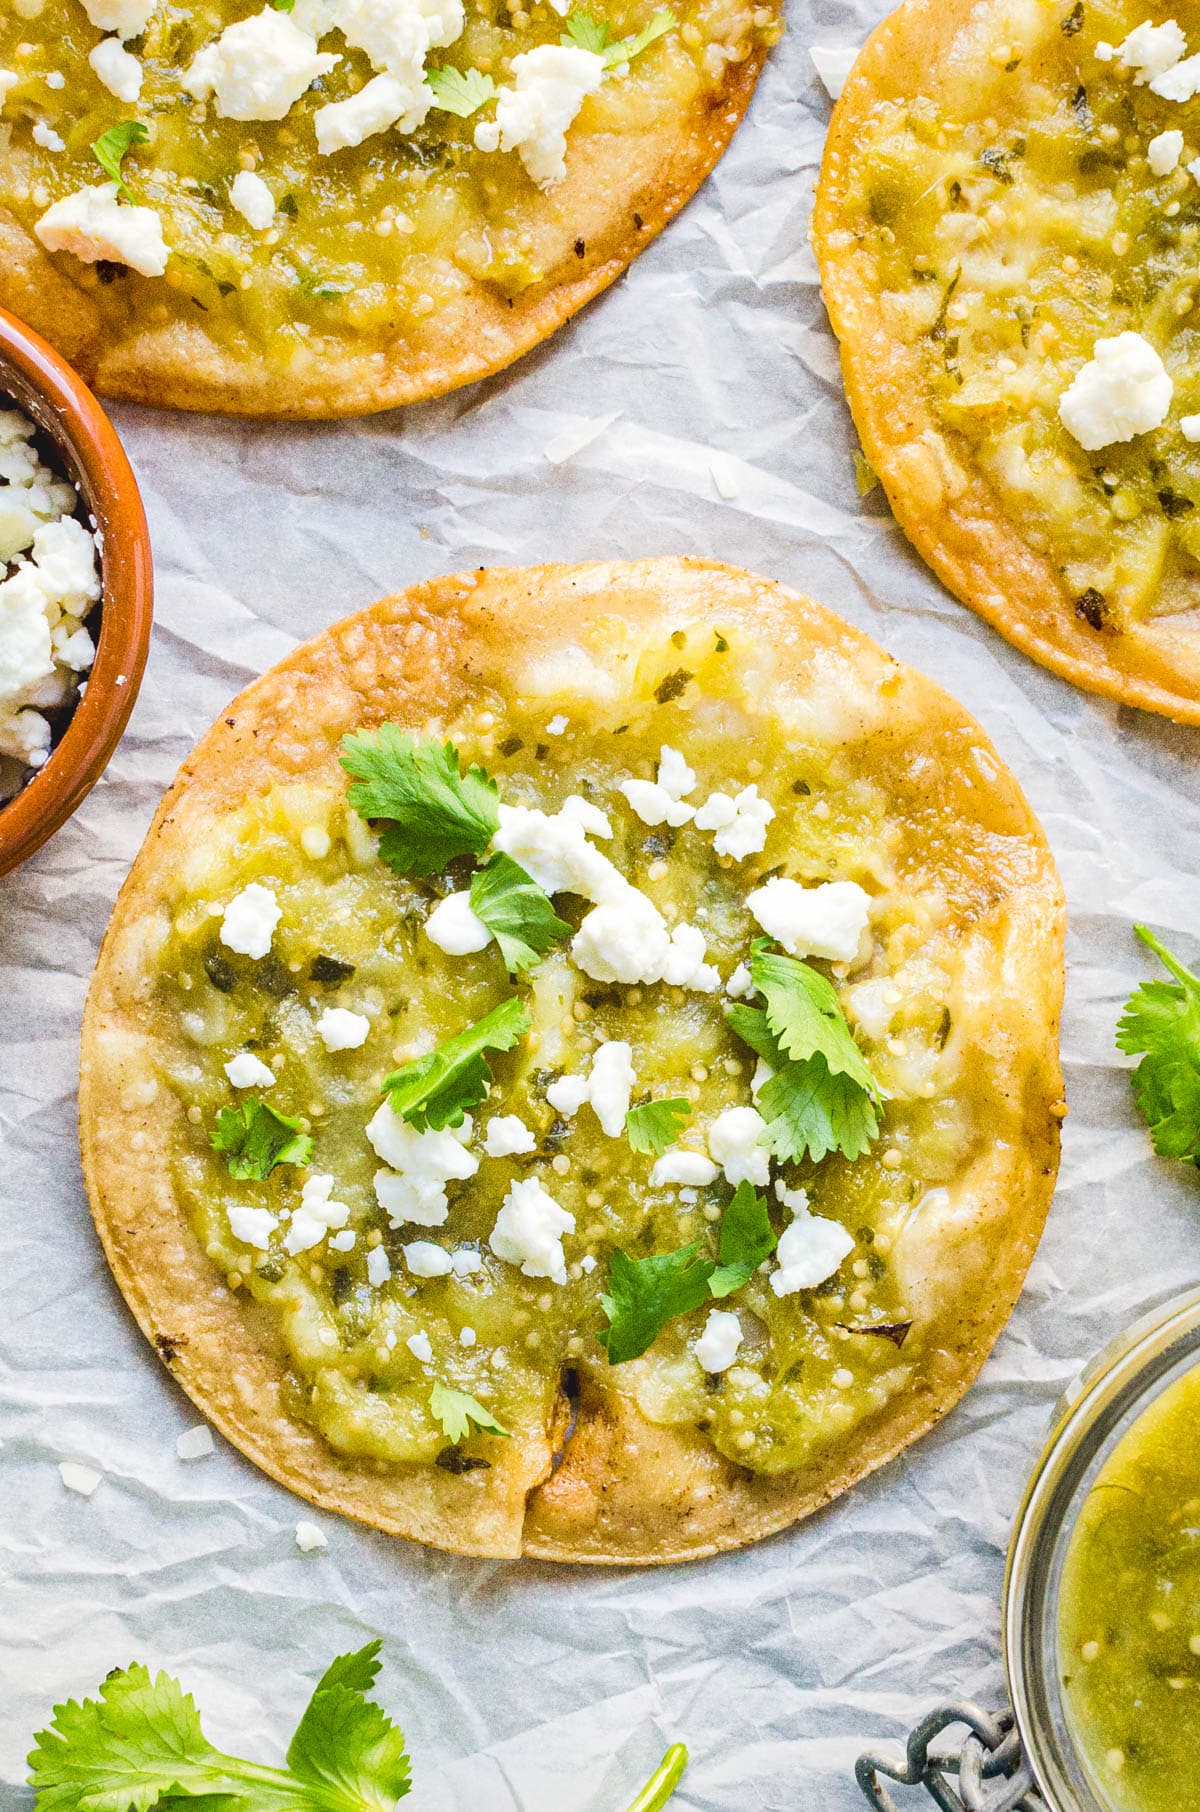 serve homemade Mexican chalupas with toppings sparingly. They're not meant to be stuffed.